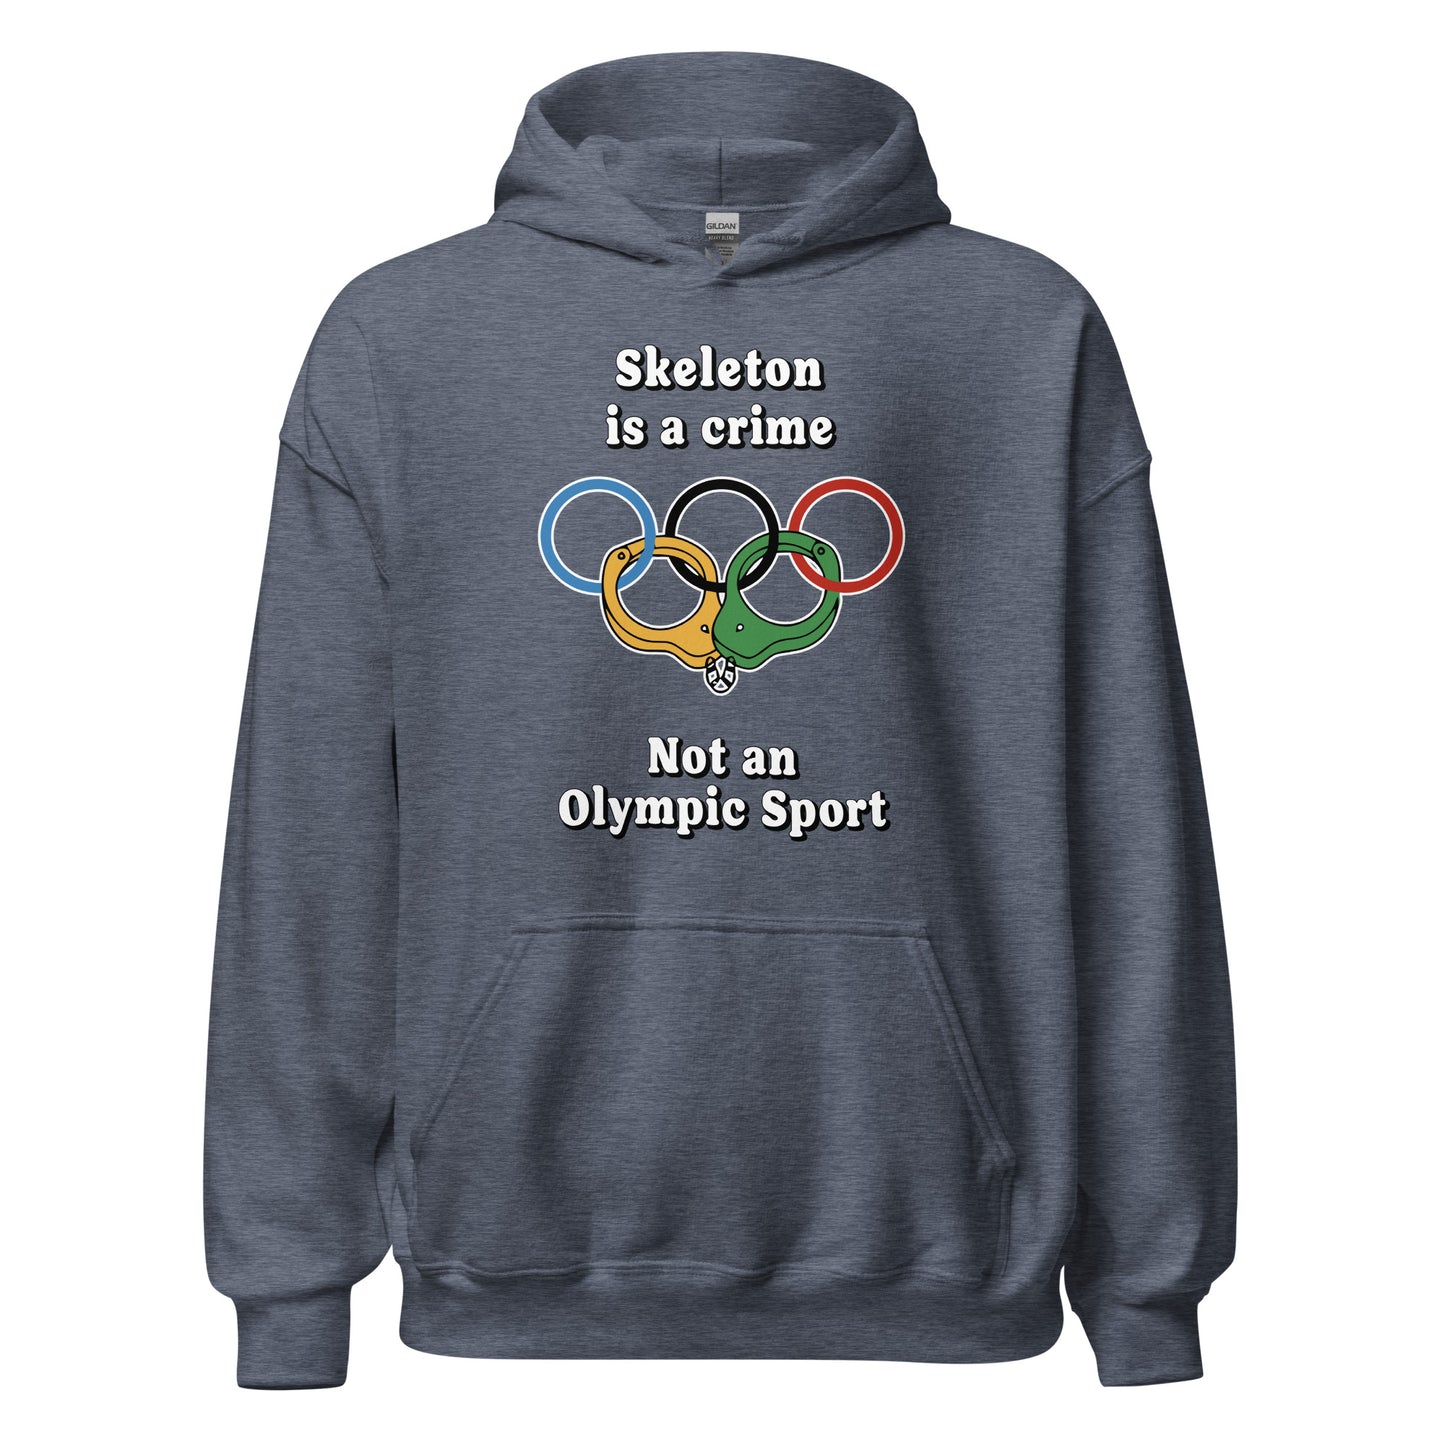 Skeleton is a crime not an olympic sport design printed on a hoodie by Whistler Shirts